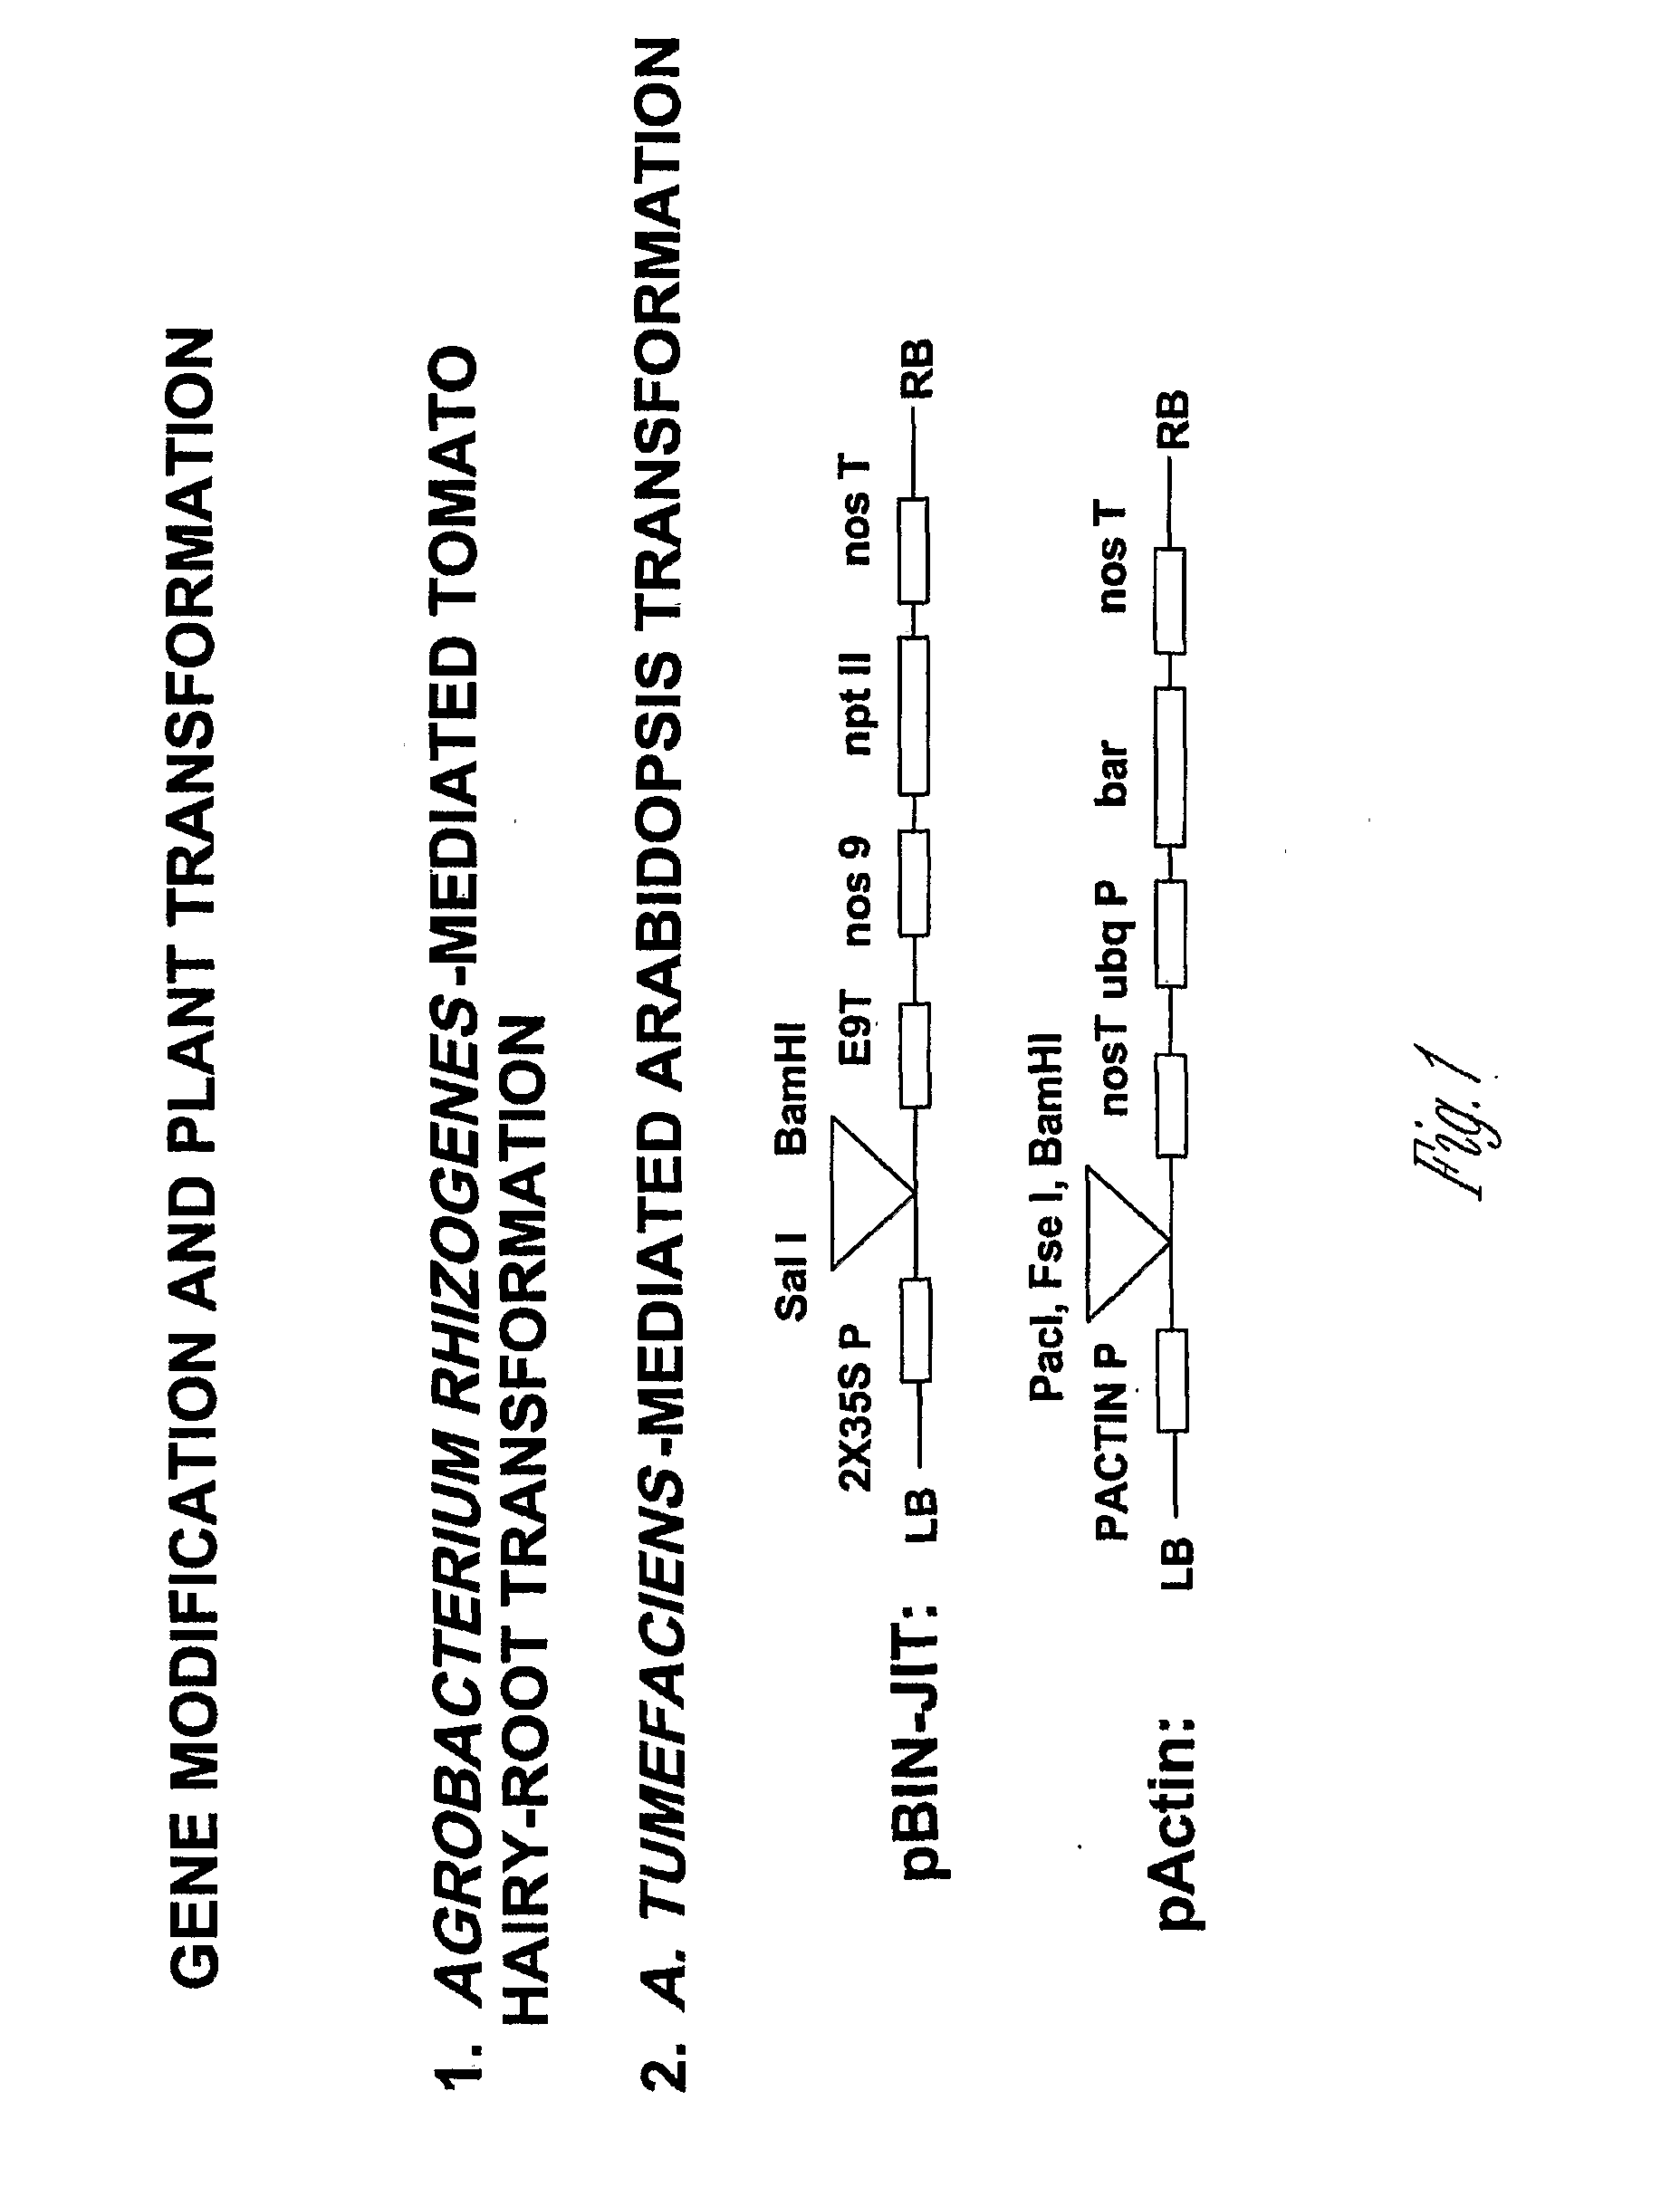 Method for Controlling Plant-Parasitic Nematode Infections in Plants